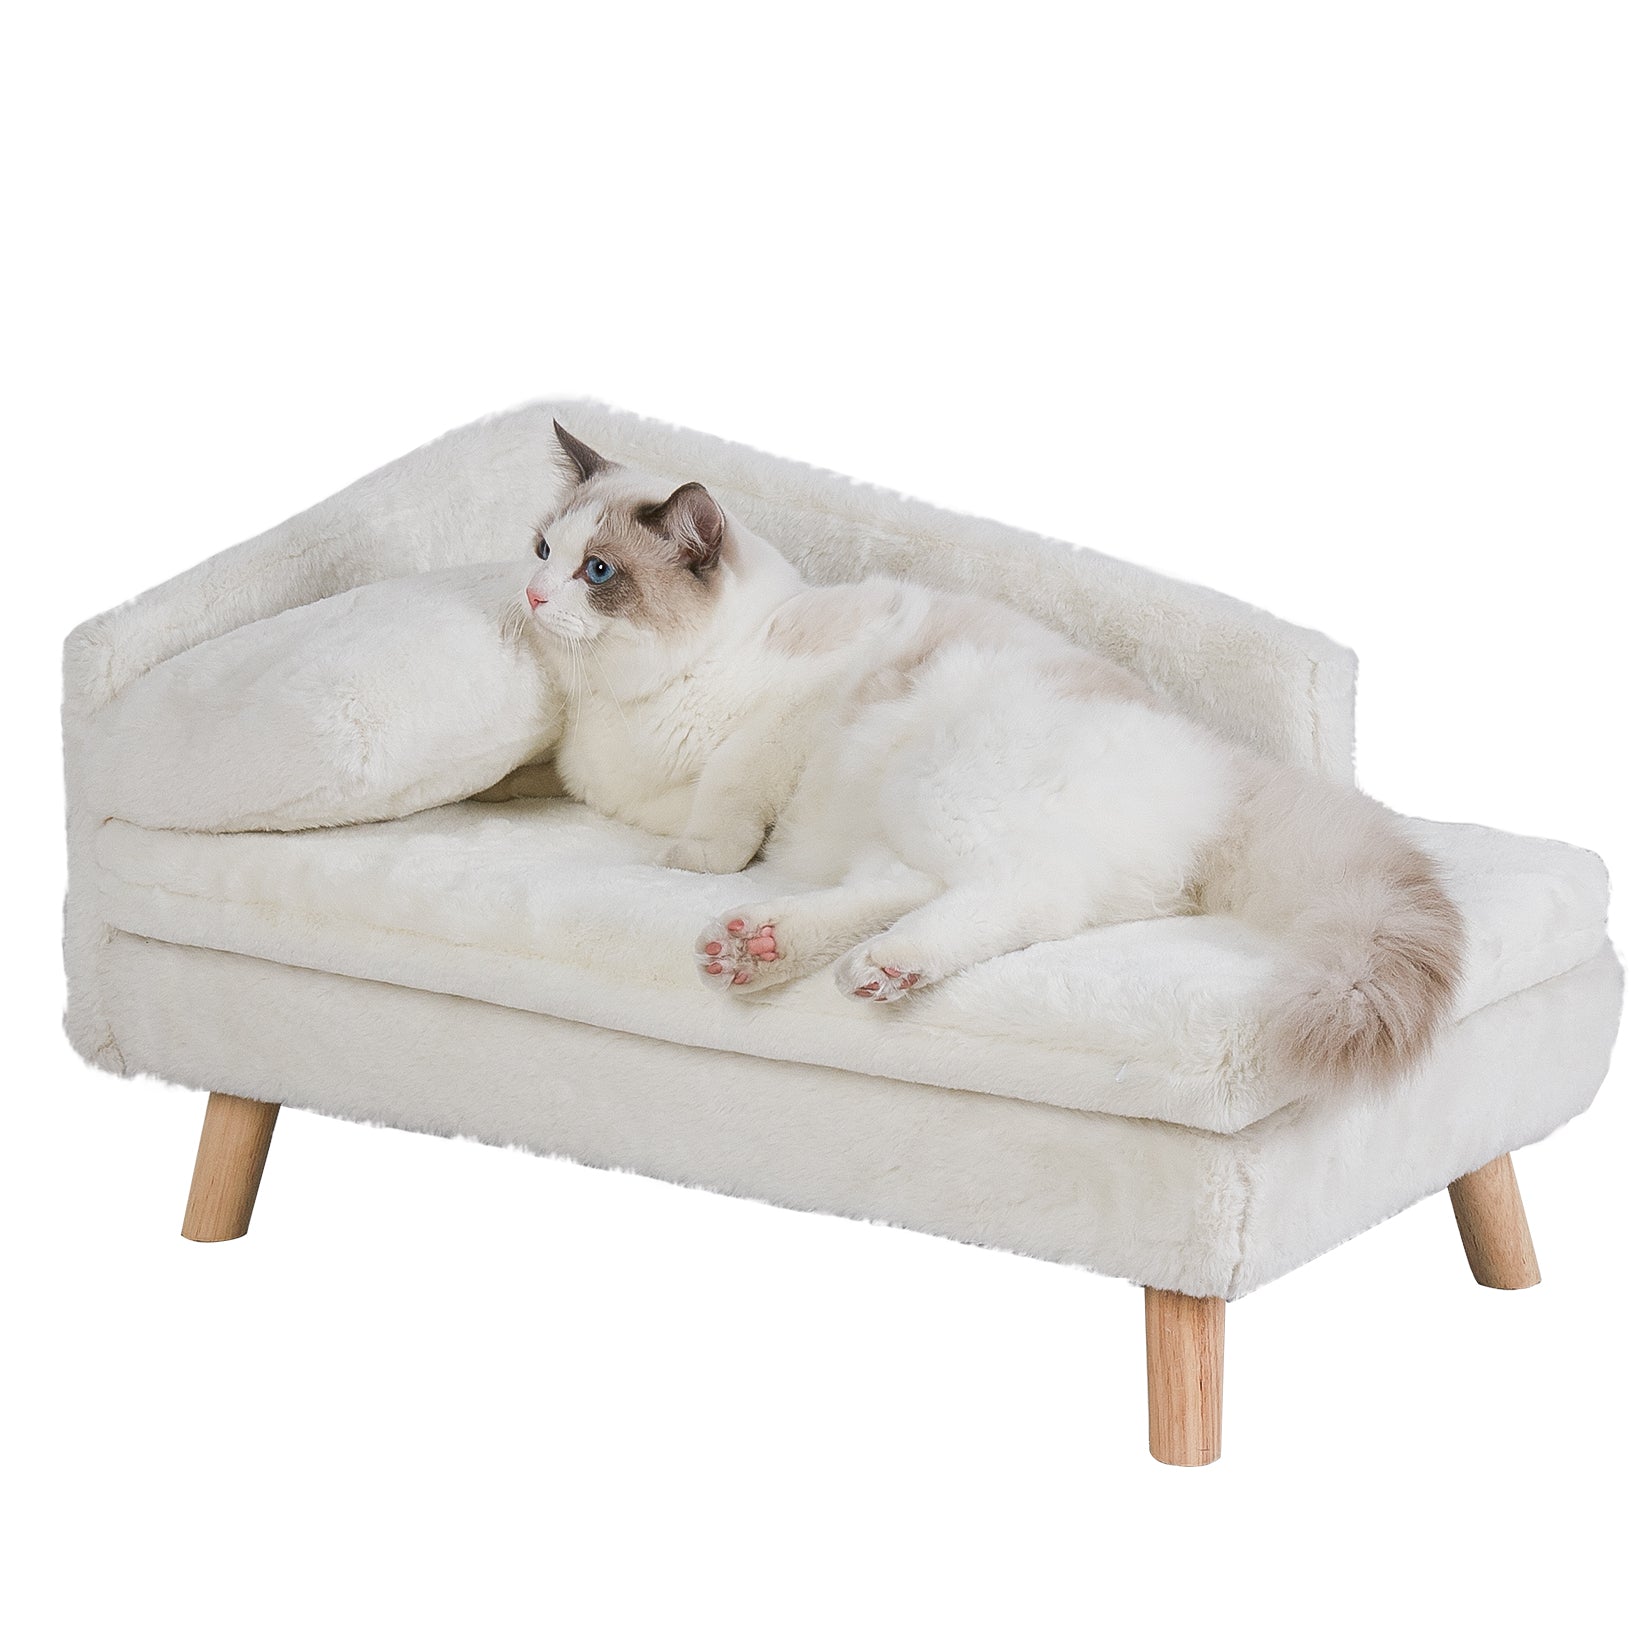 Adorable look dog couch bed, L shape design, designed with a plush cover for extra warmth, you will feel smooth and soft when you receive the bed. Very sturdy with the rubber wood legs sitting on the floor. It is stylish and fits any puppies and cats.